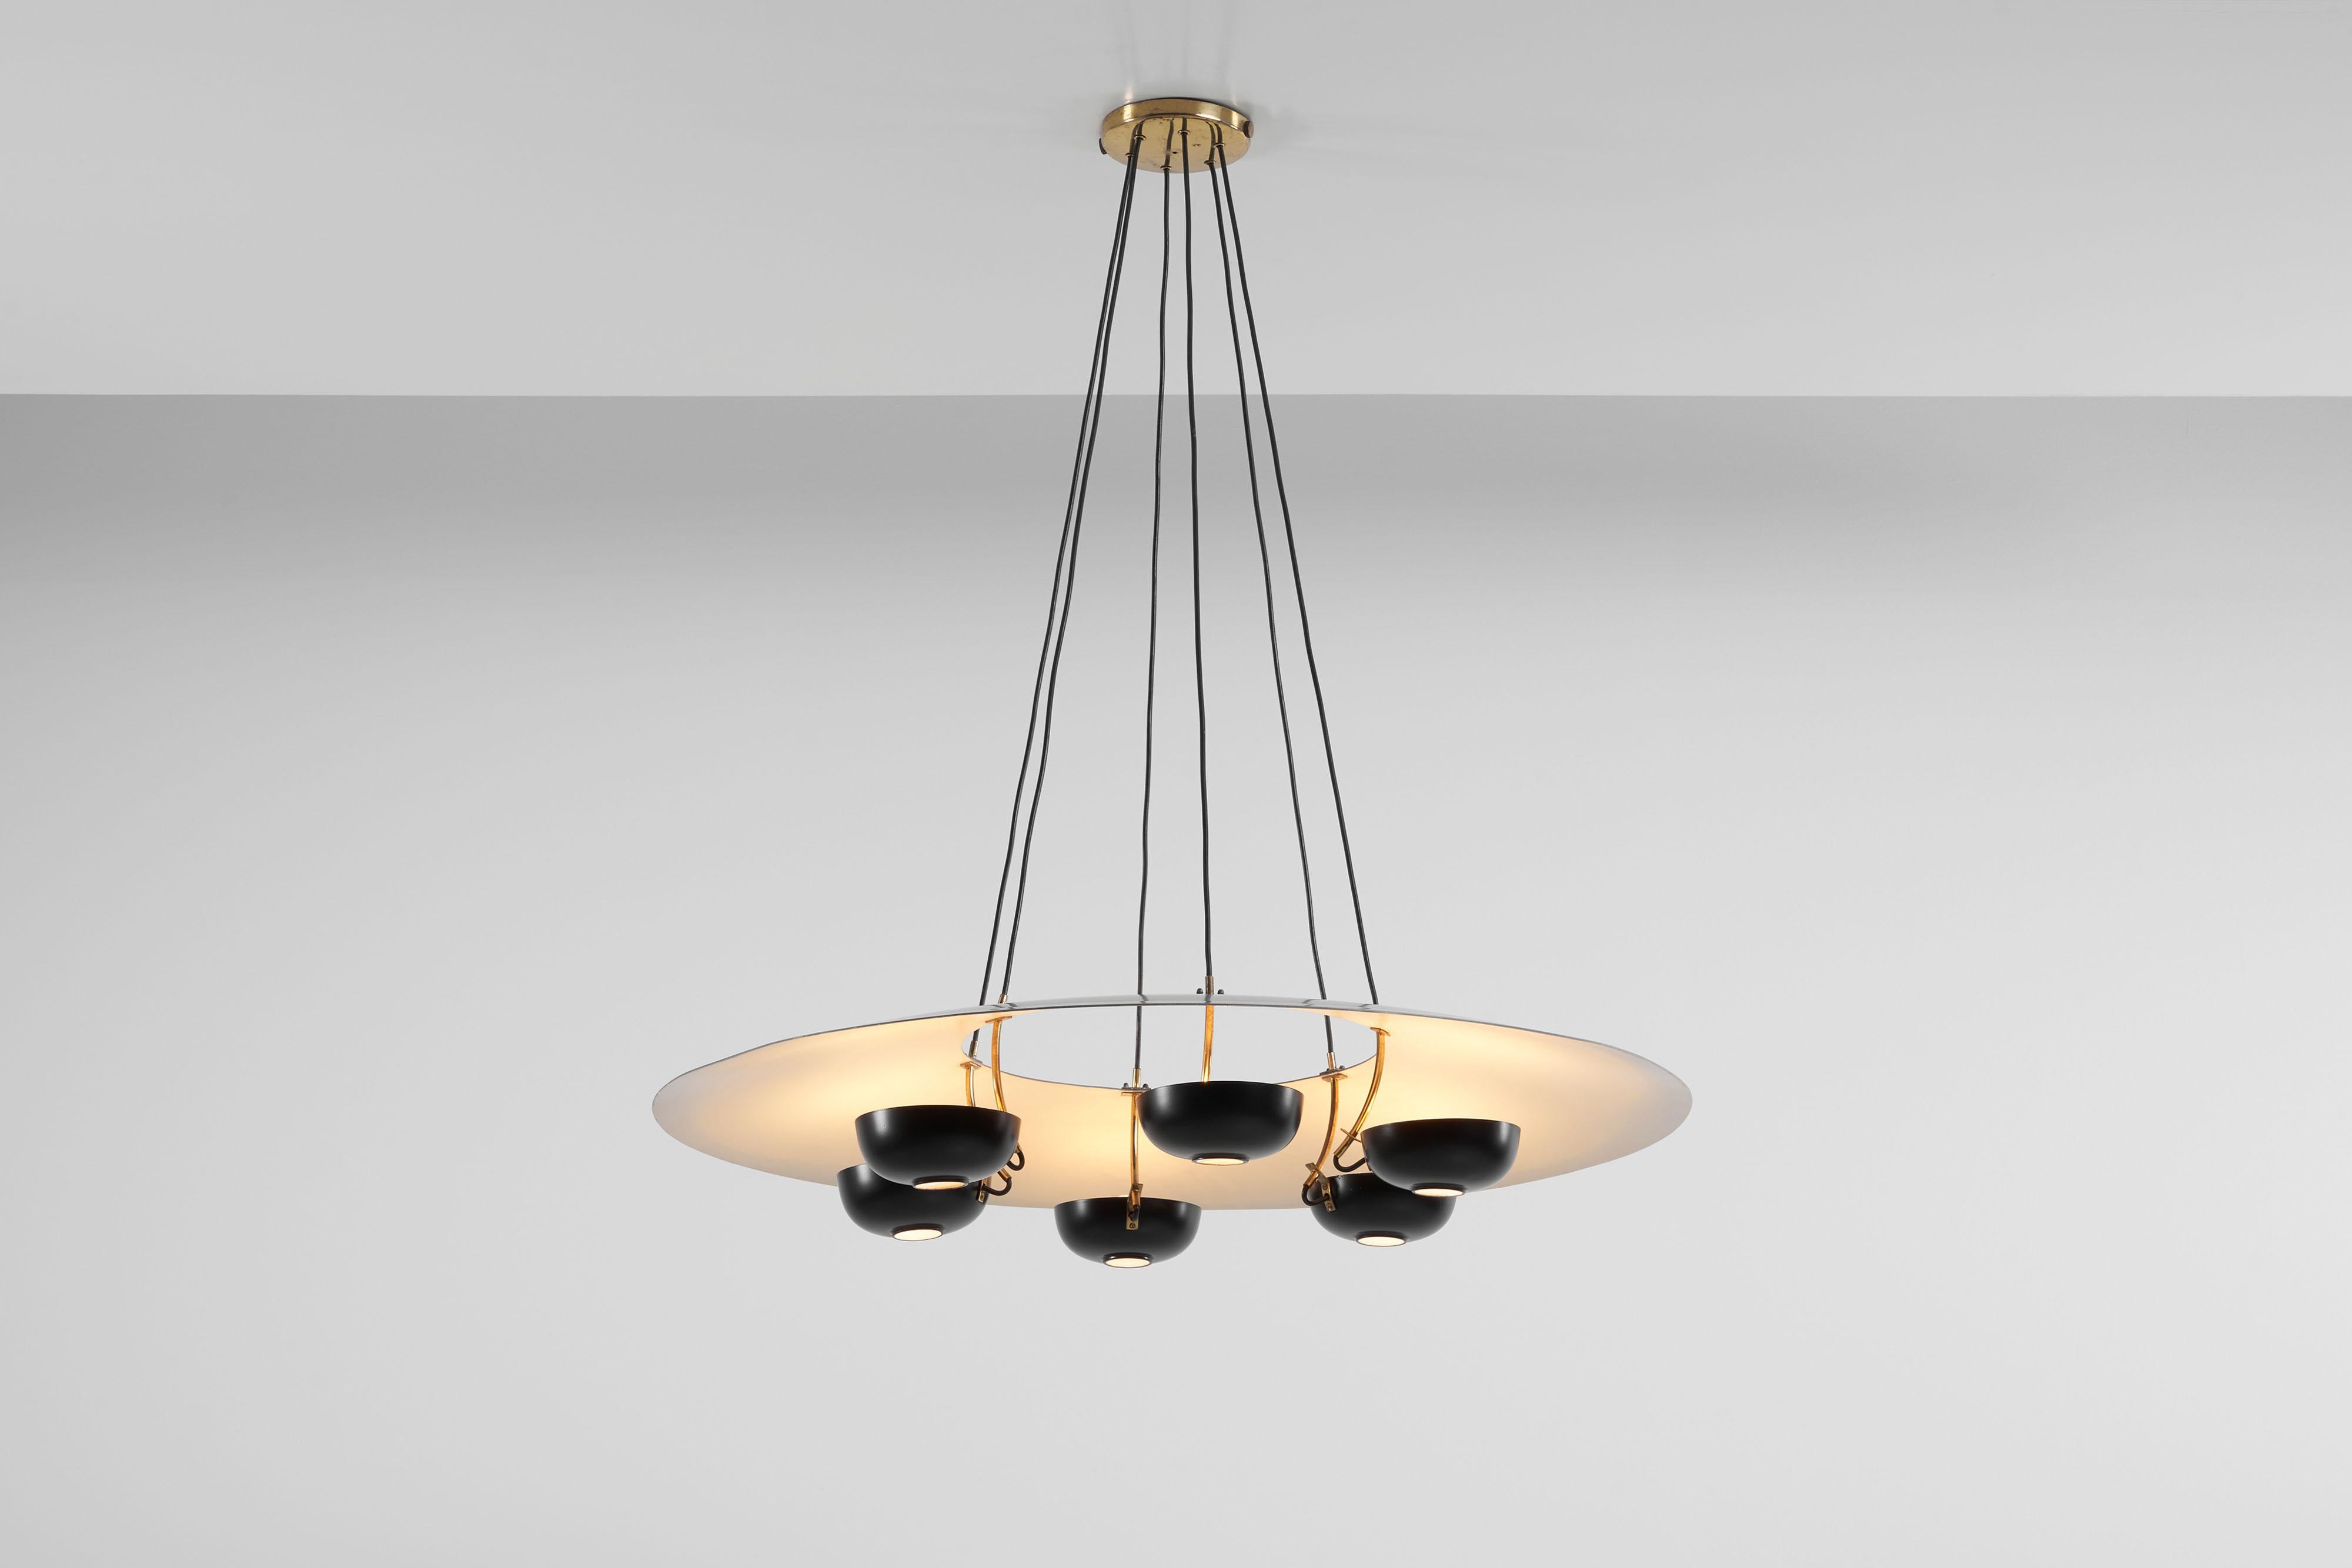 A monumental model 2058 chandelier designed by Gino Sarfatti and manufactured by Arteluce, Italy 1954. This large sized chandelier has a disk-shaped reflector with a hole in the middle which was painted white on the inside and grey on the outside.